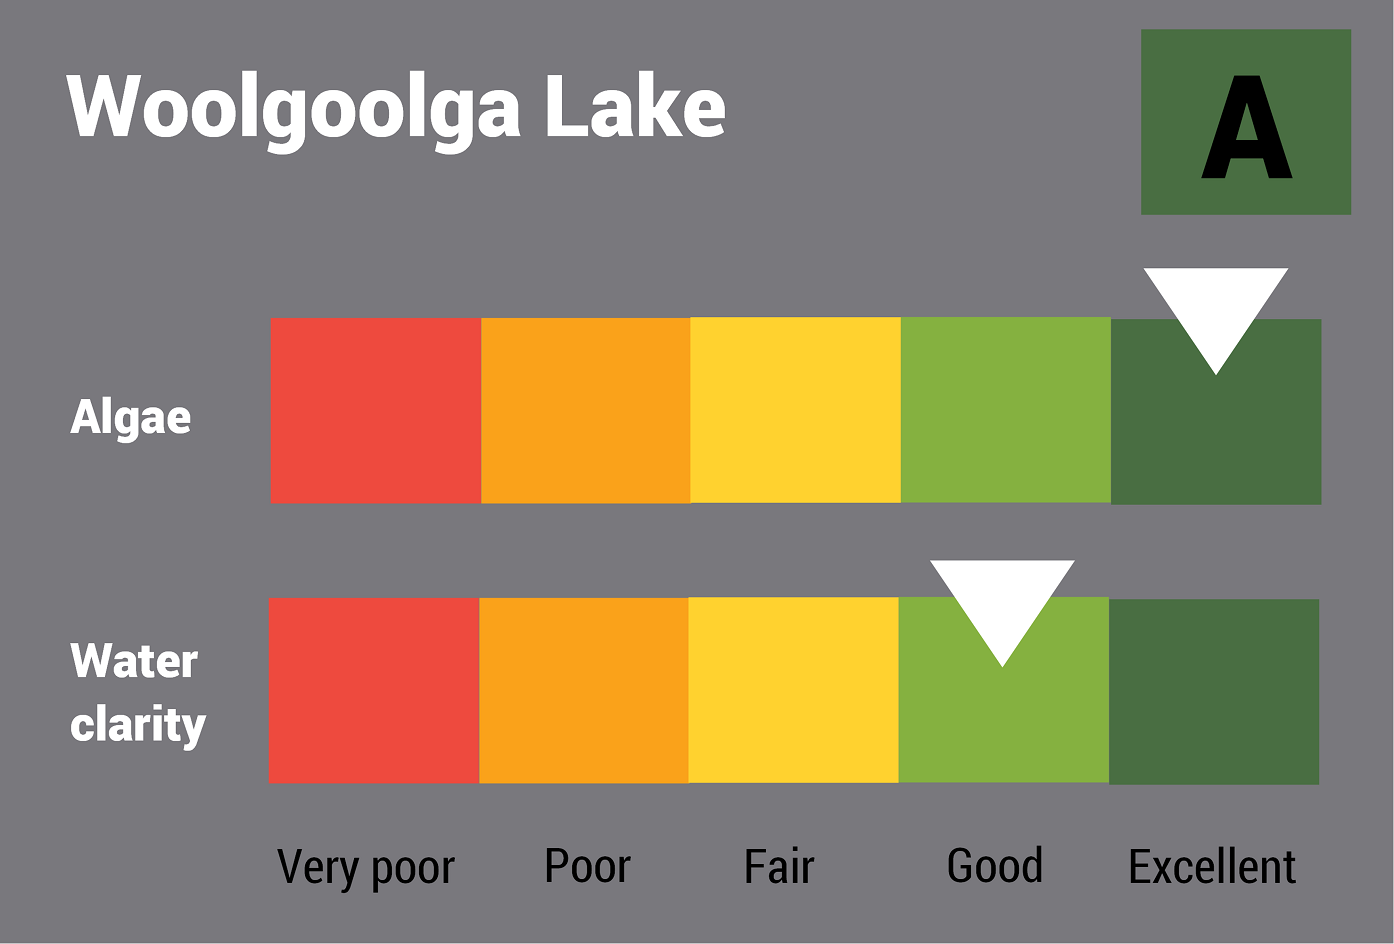 Woolgoolga Lake  water quality report card for algae and water clarity showing colour-coded ratings (red, orange, yellow, light green and dark green, which represent very poor, poor, fair, good and excellent, respectively). Algae is rated 'excellent' and water clarity is rated 'good' giving an overall rating of 'excellent' or 'A'.